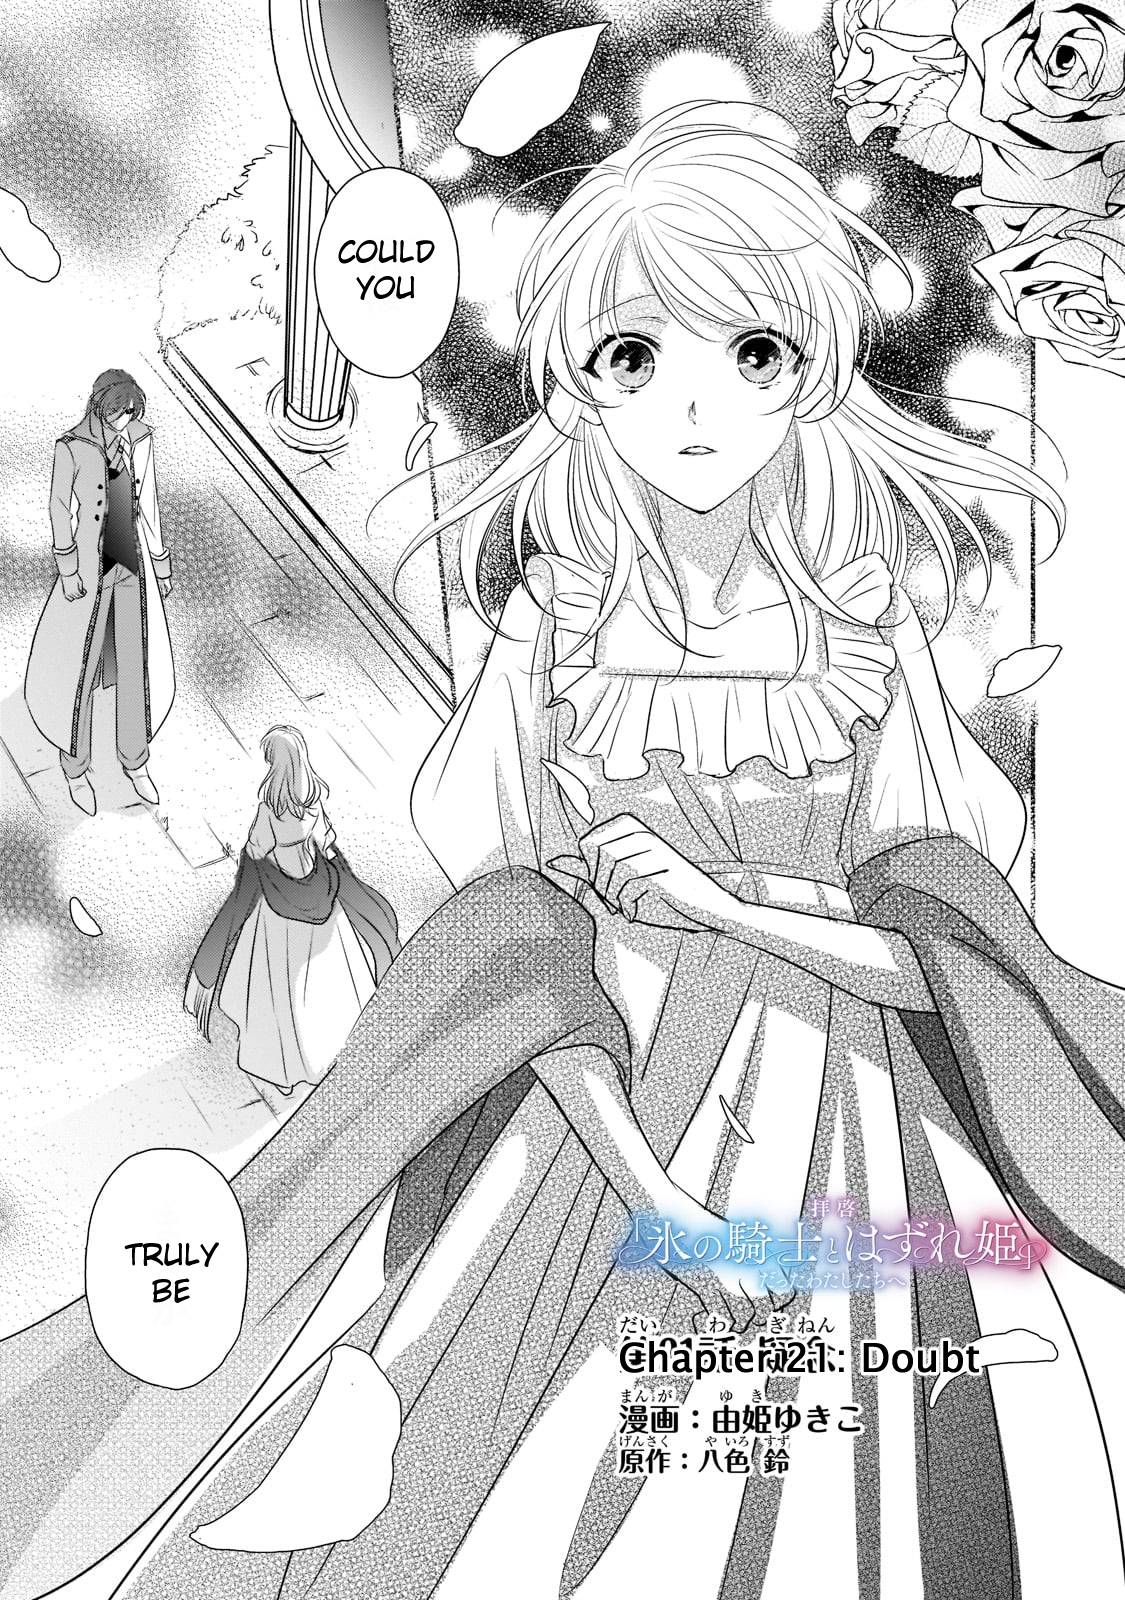 Dear Us Who Used To Be "the Ice Knight And The Failure Princess" - chapter 21 - #1